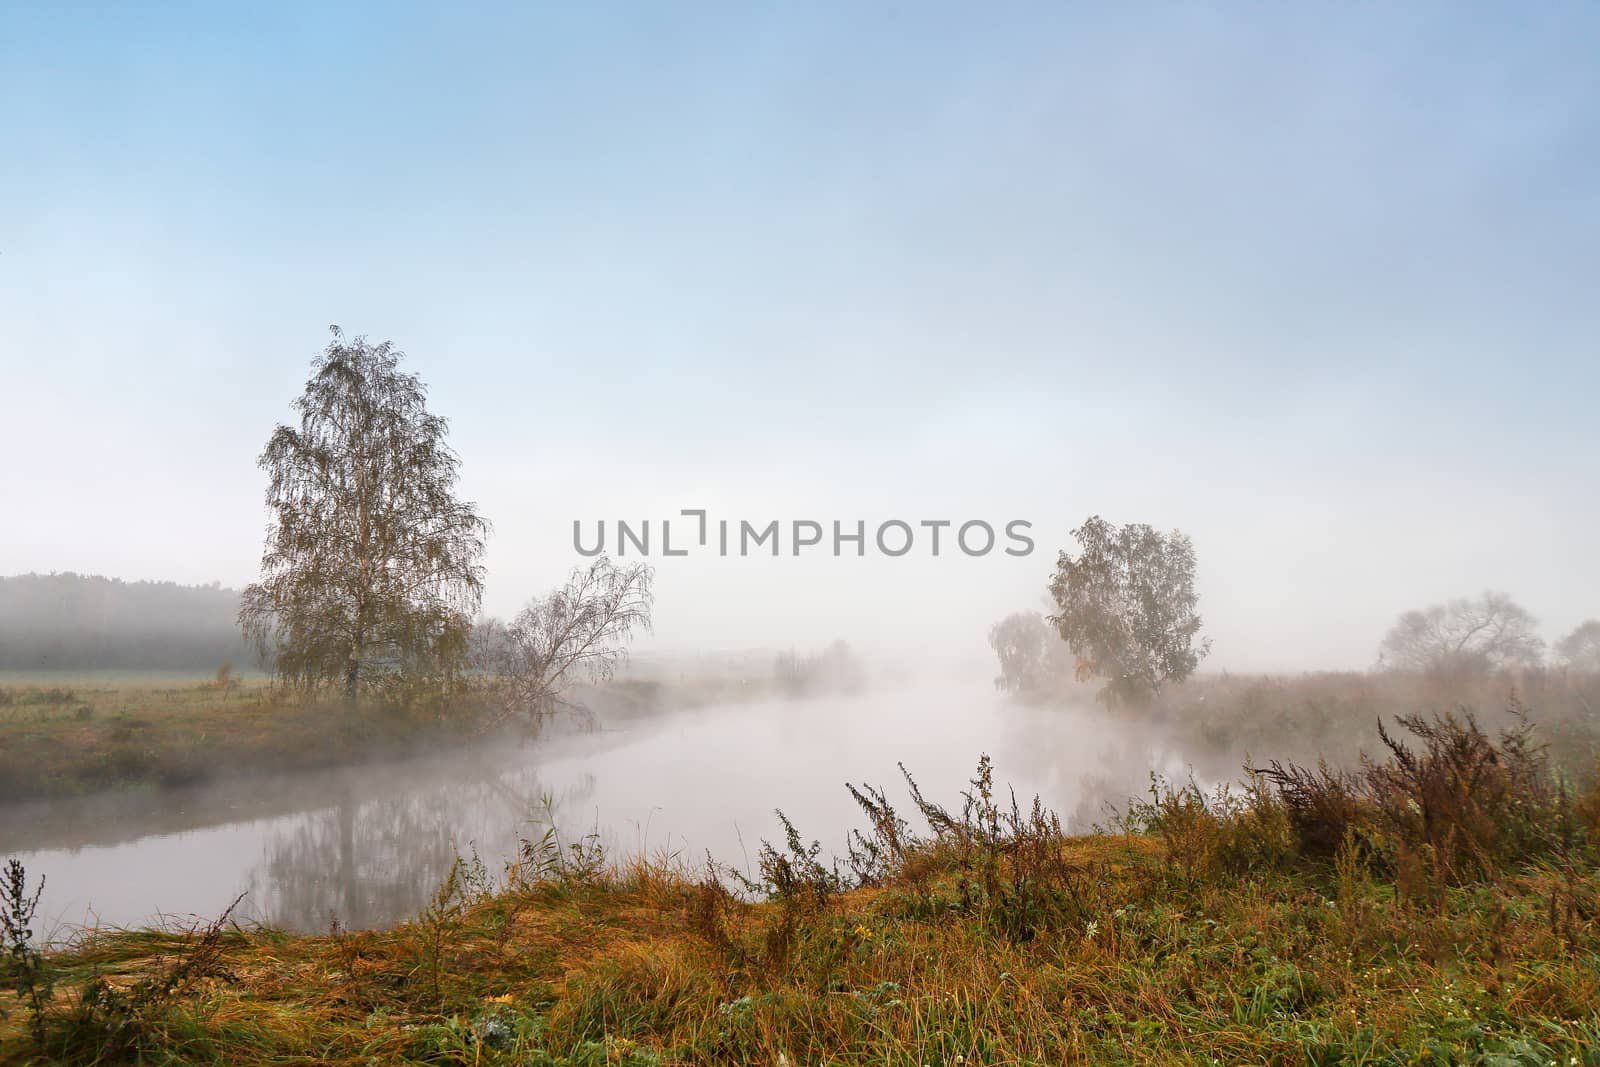 Autumn foggy morning. Dawn on the misty tranquil river